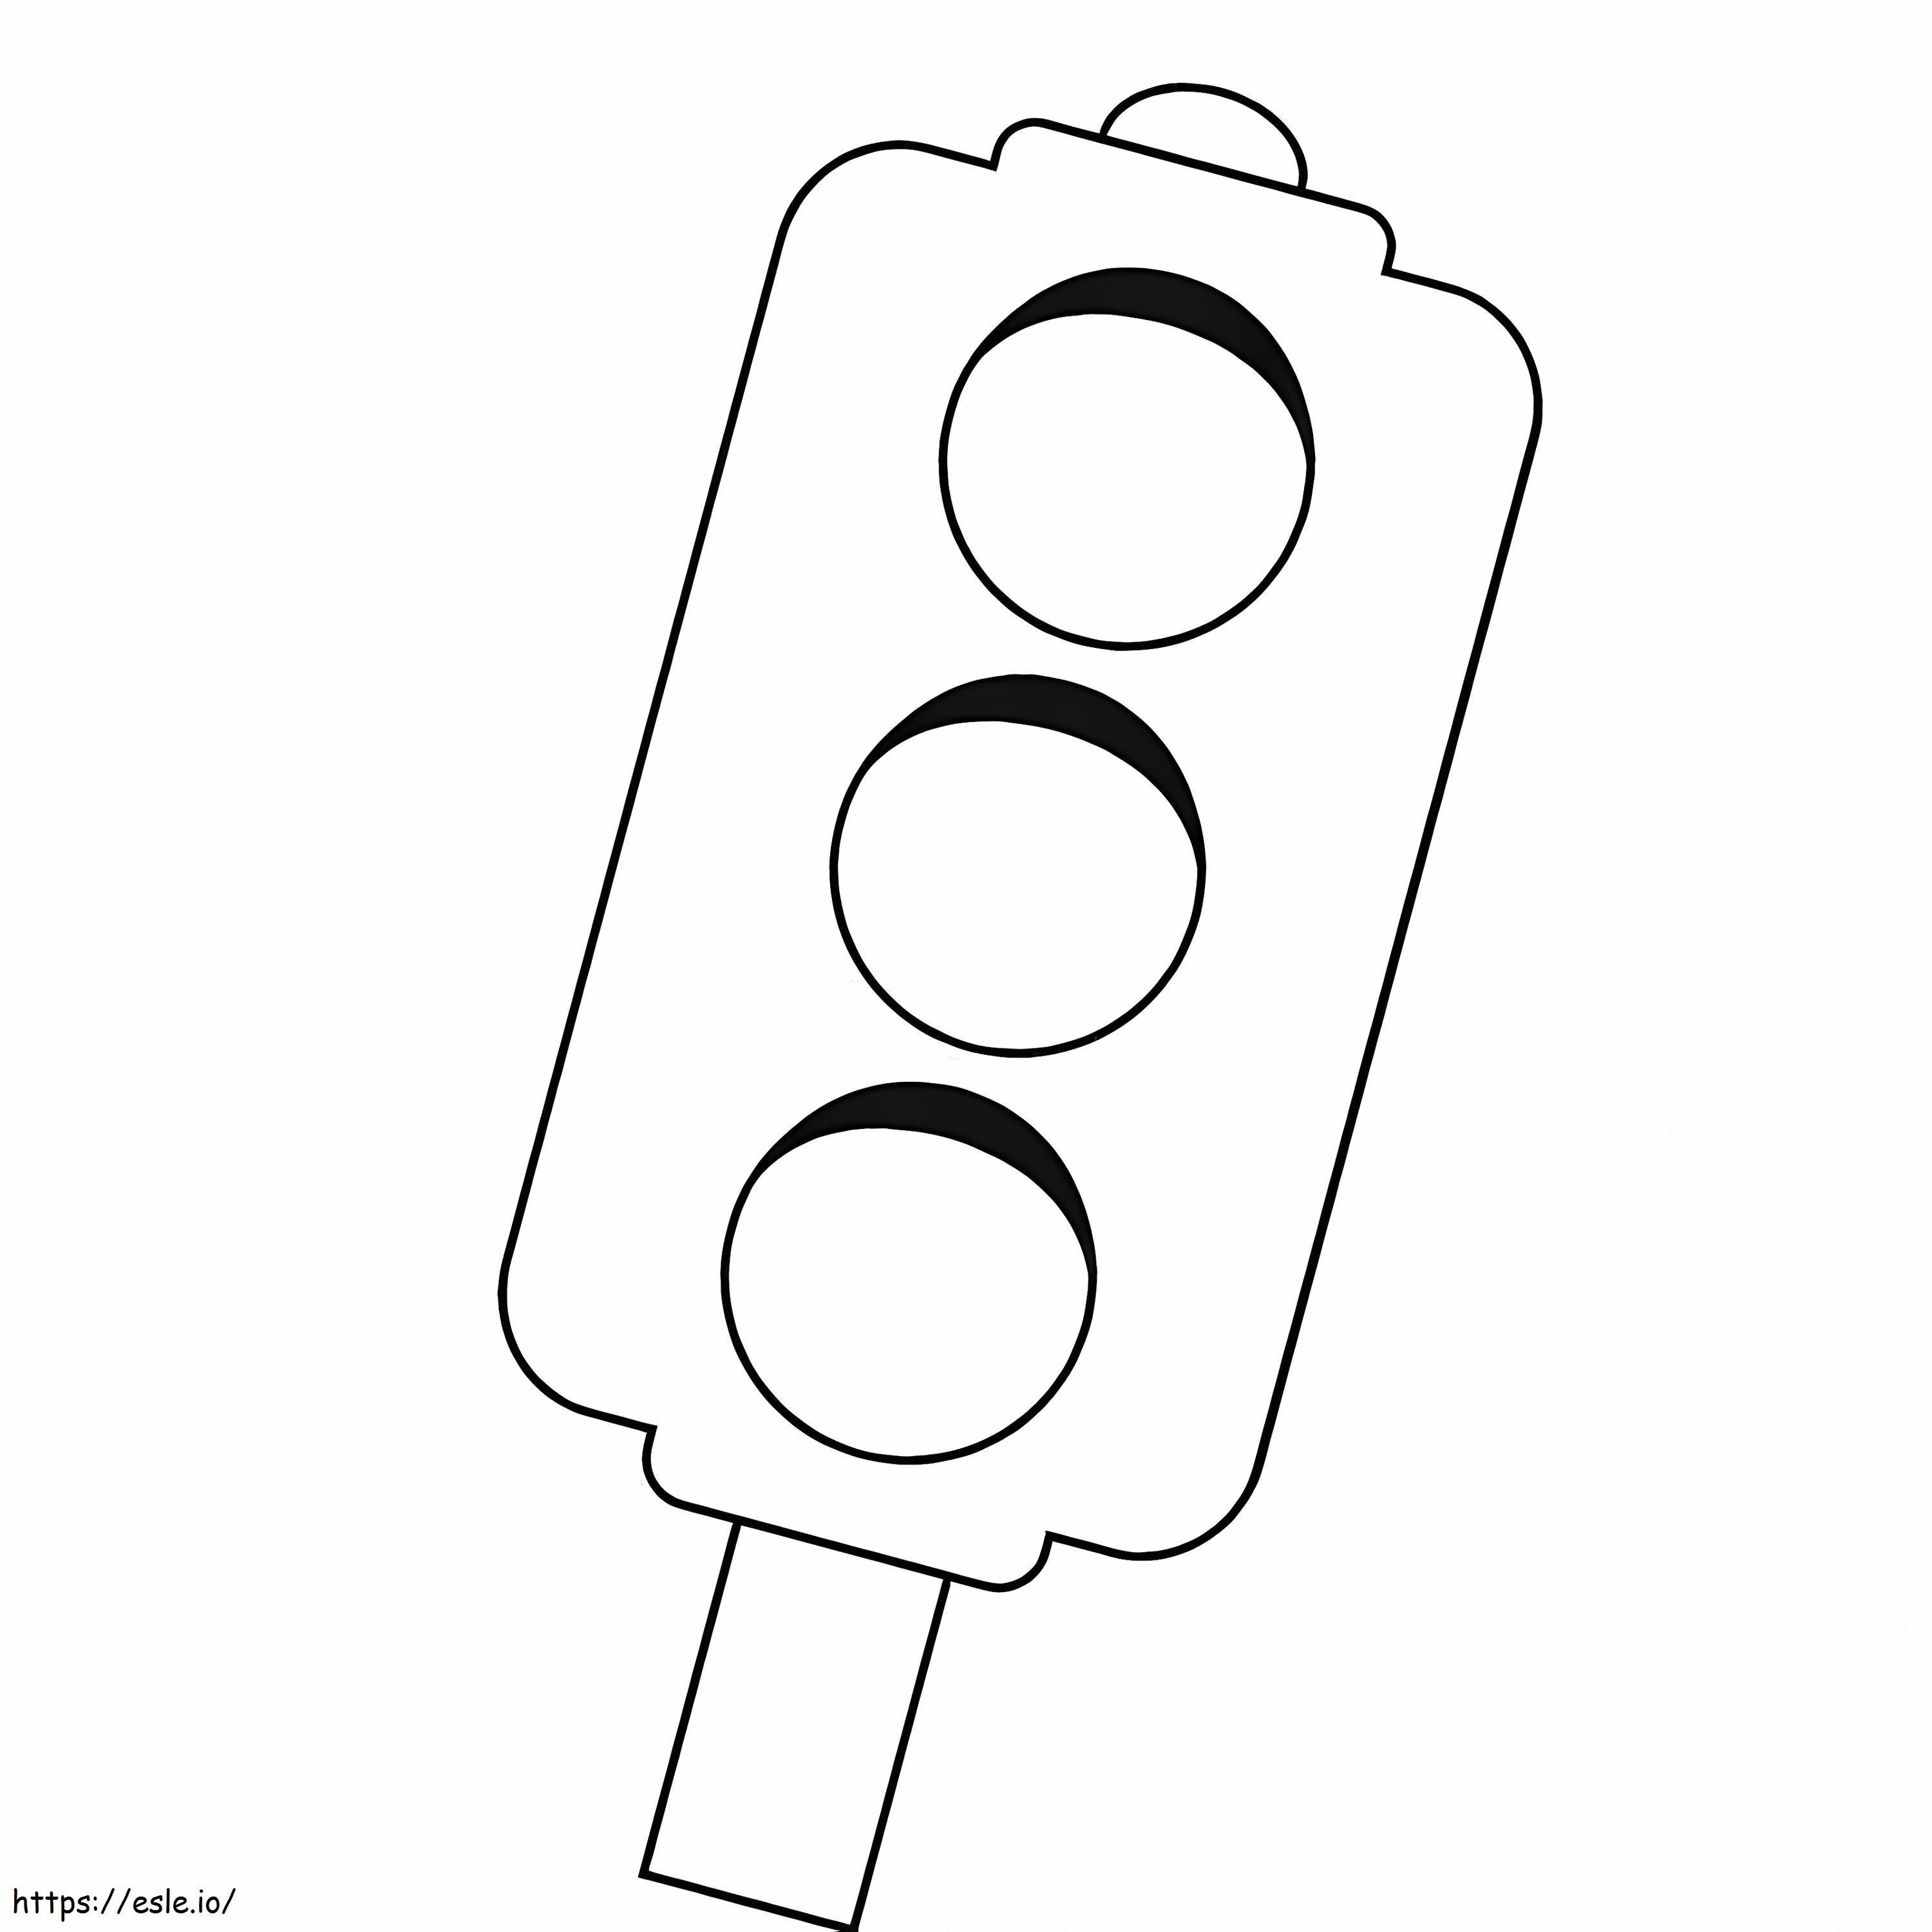 Very Easy Traffic Light coloring page